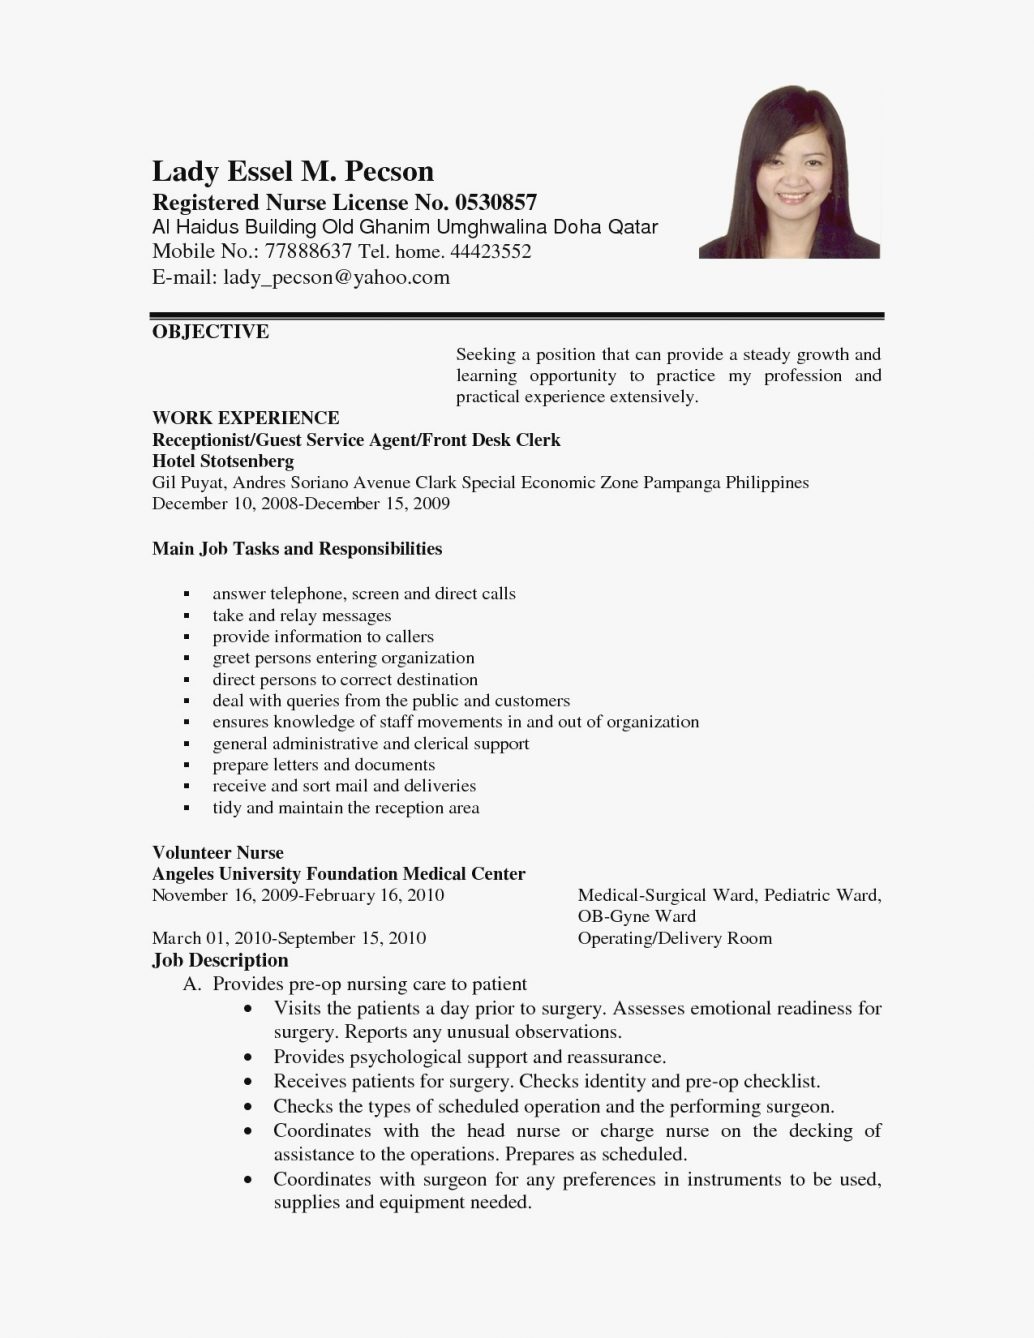 Objective For Resume Job Objective In Resumes Simple For Resume Fresh Good Objectives New Post Administrative Assistant Effective Objecti Customer Service Career Call Center General Phlebotomist Teac objective for resume|wikiresume.com